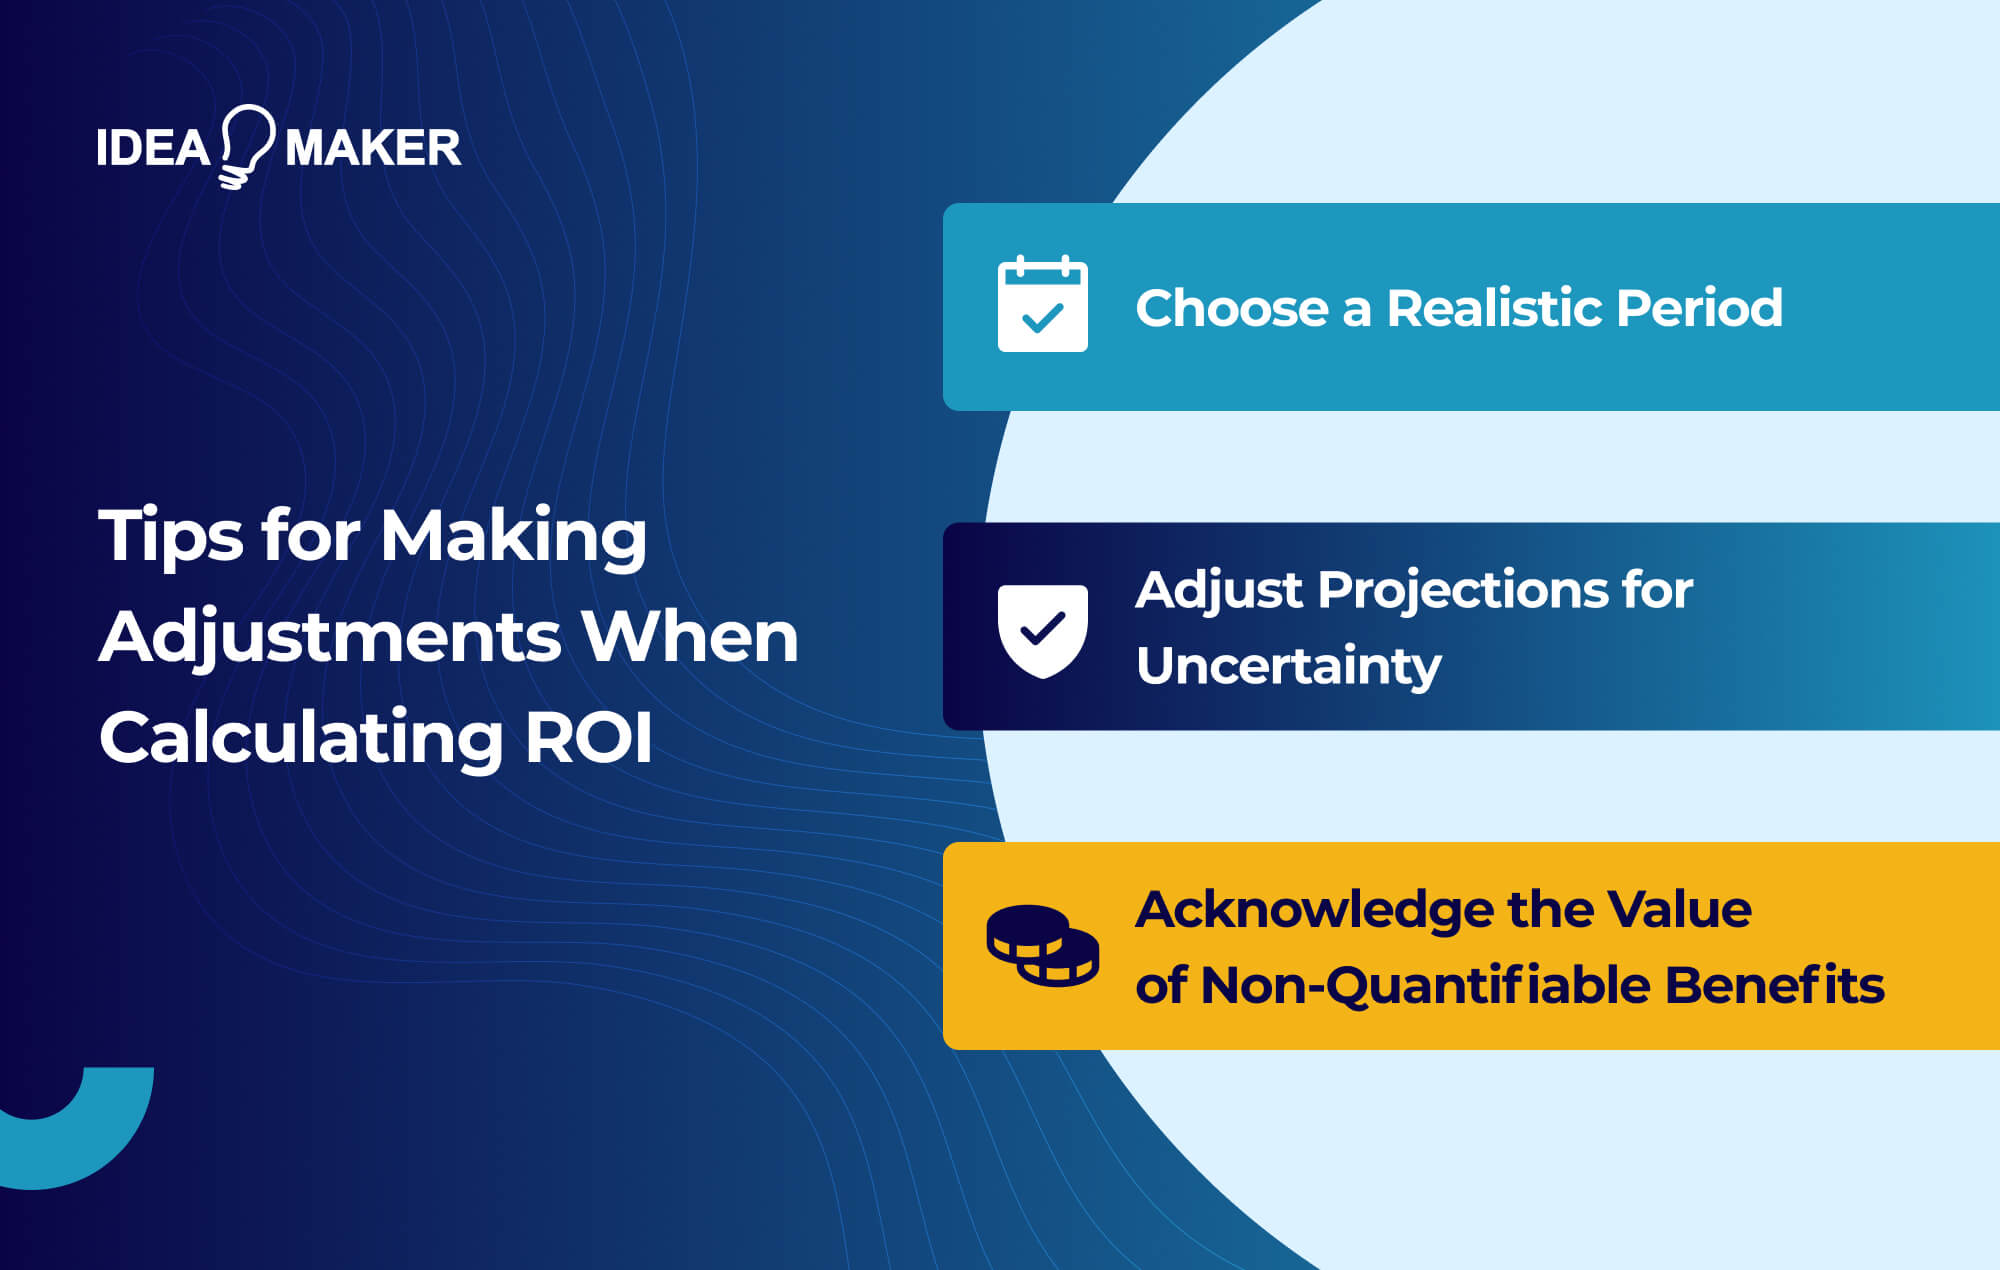 Ideamaker - Tips for Making Adjustments When Calculating ROI